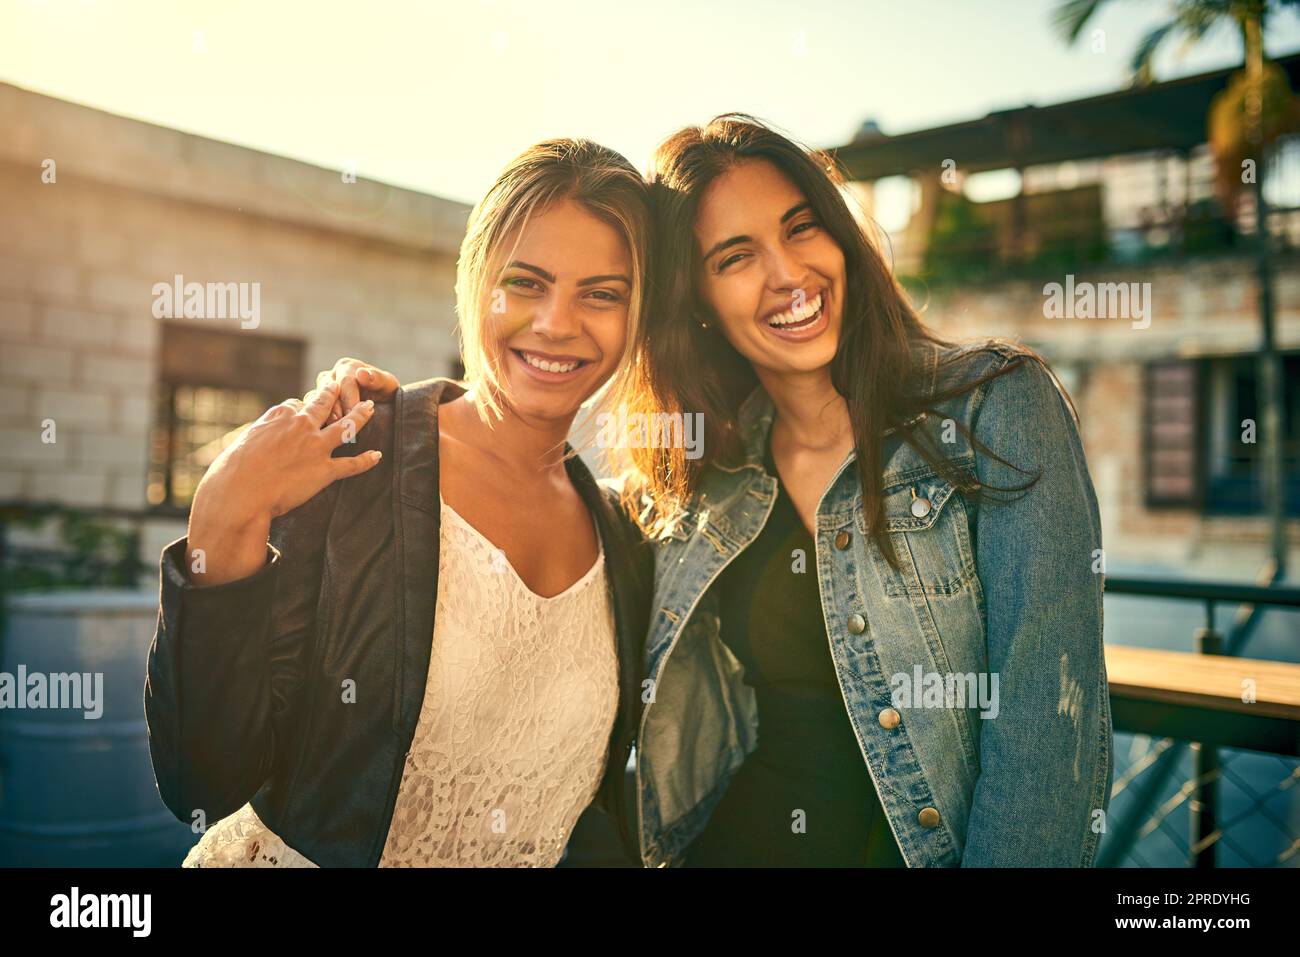 Its always the best time with my best friend. Portrait of two female friends spending the day outside on a rooftop. Stock Photo